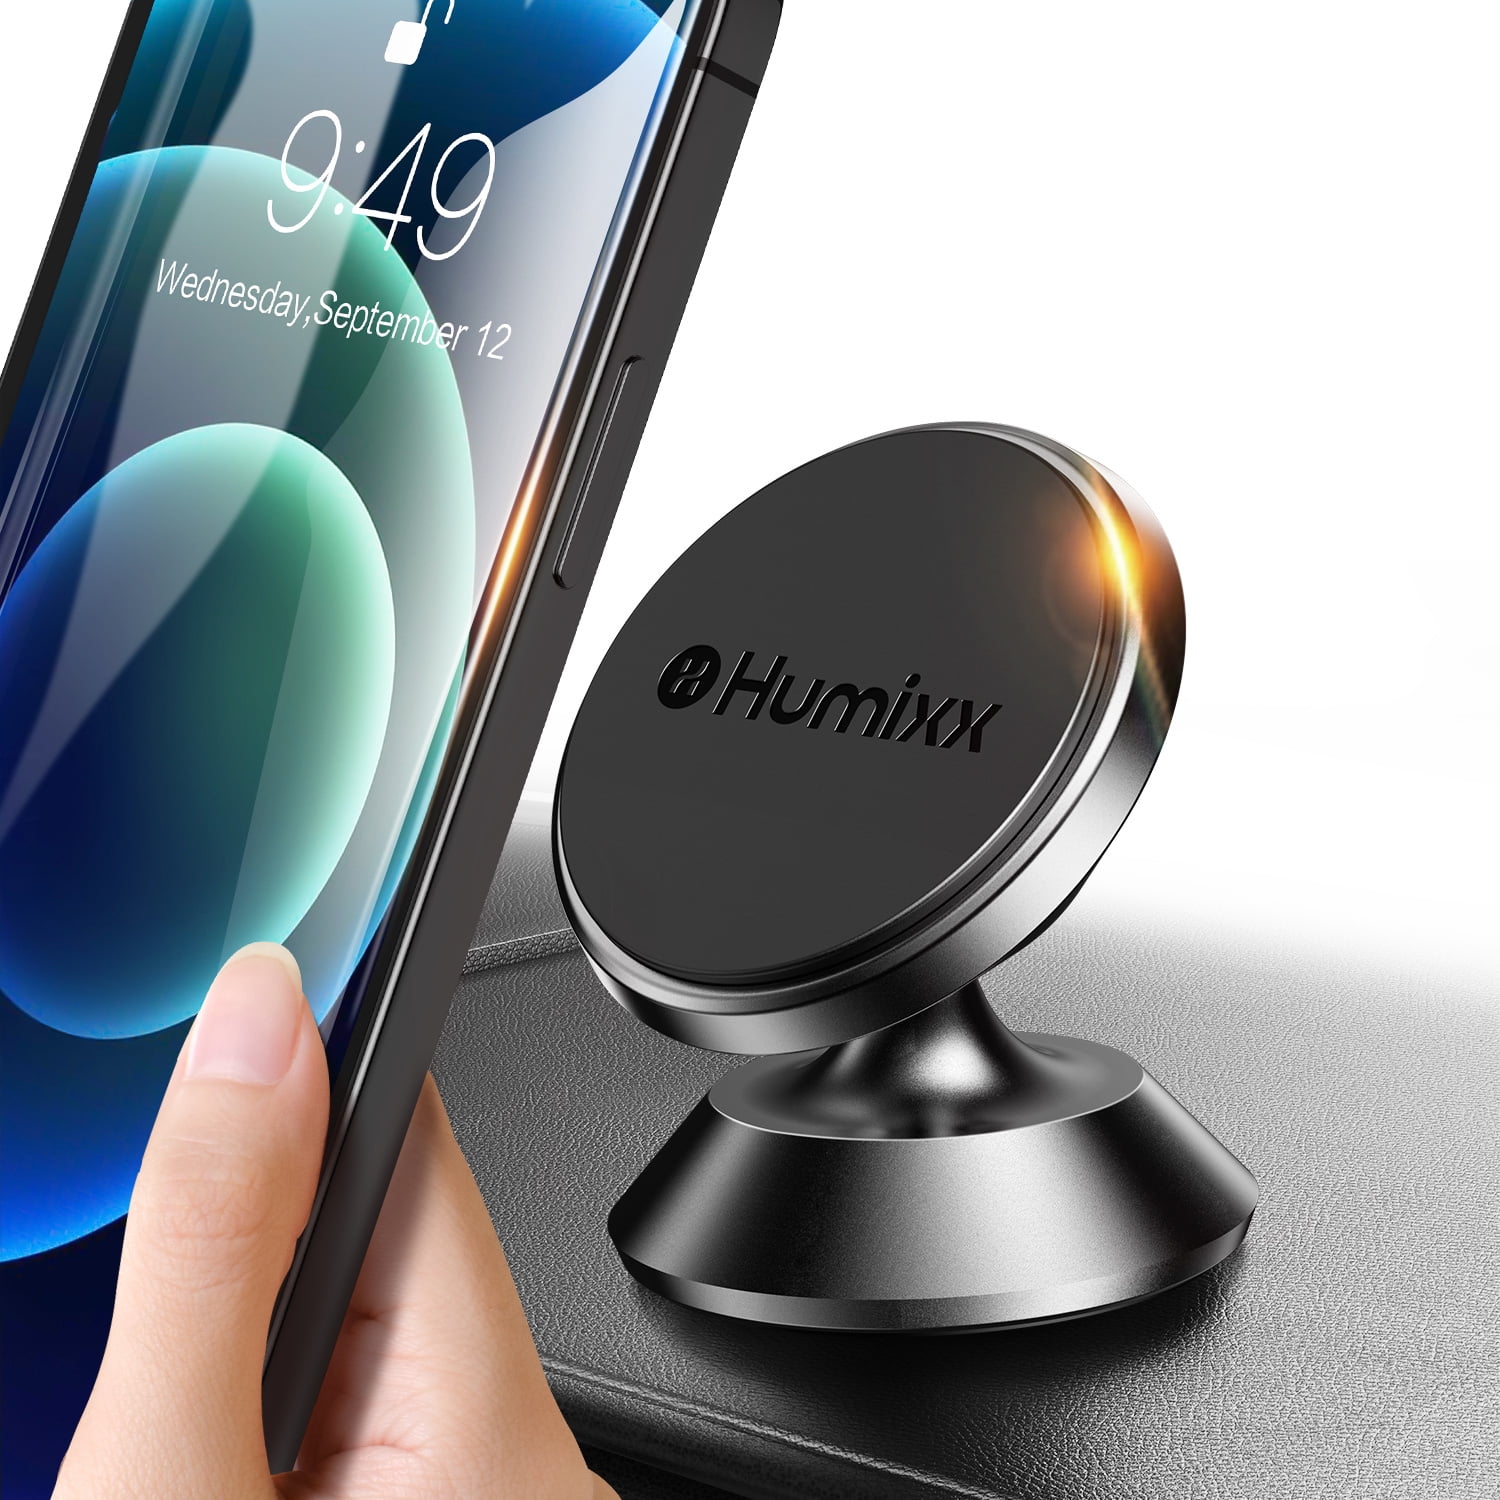 360 Degree Rotation Black Car Phone Holder Durable Design for Cellphone 4 to 6 inches Humixx Qi Wireless Charger Car Mount Holder for Dashboard 